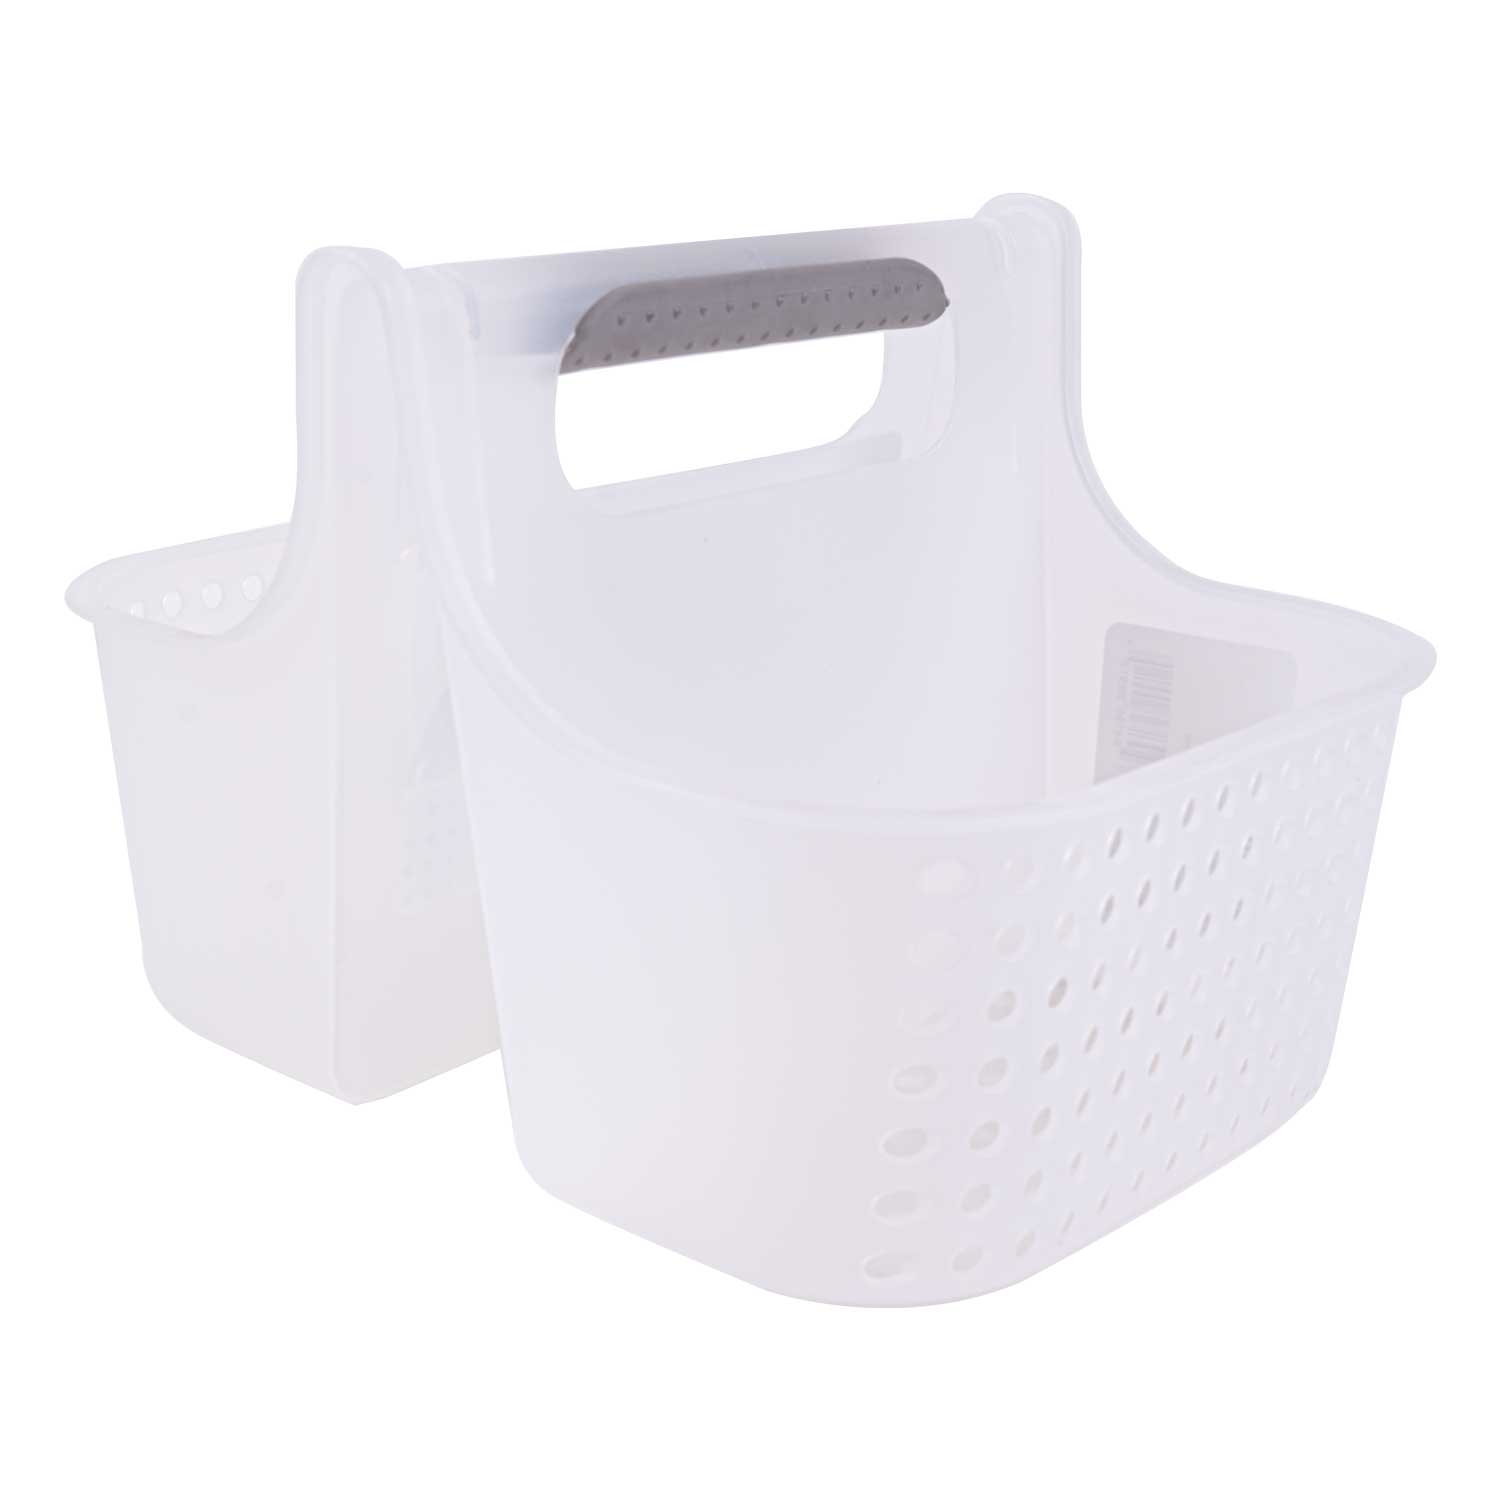 Soft grip cleaning caddy